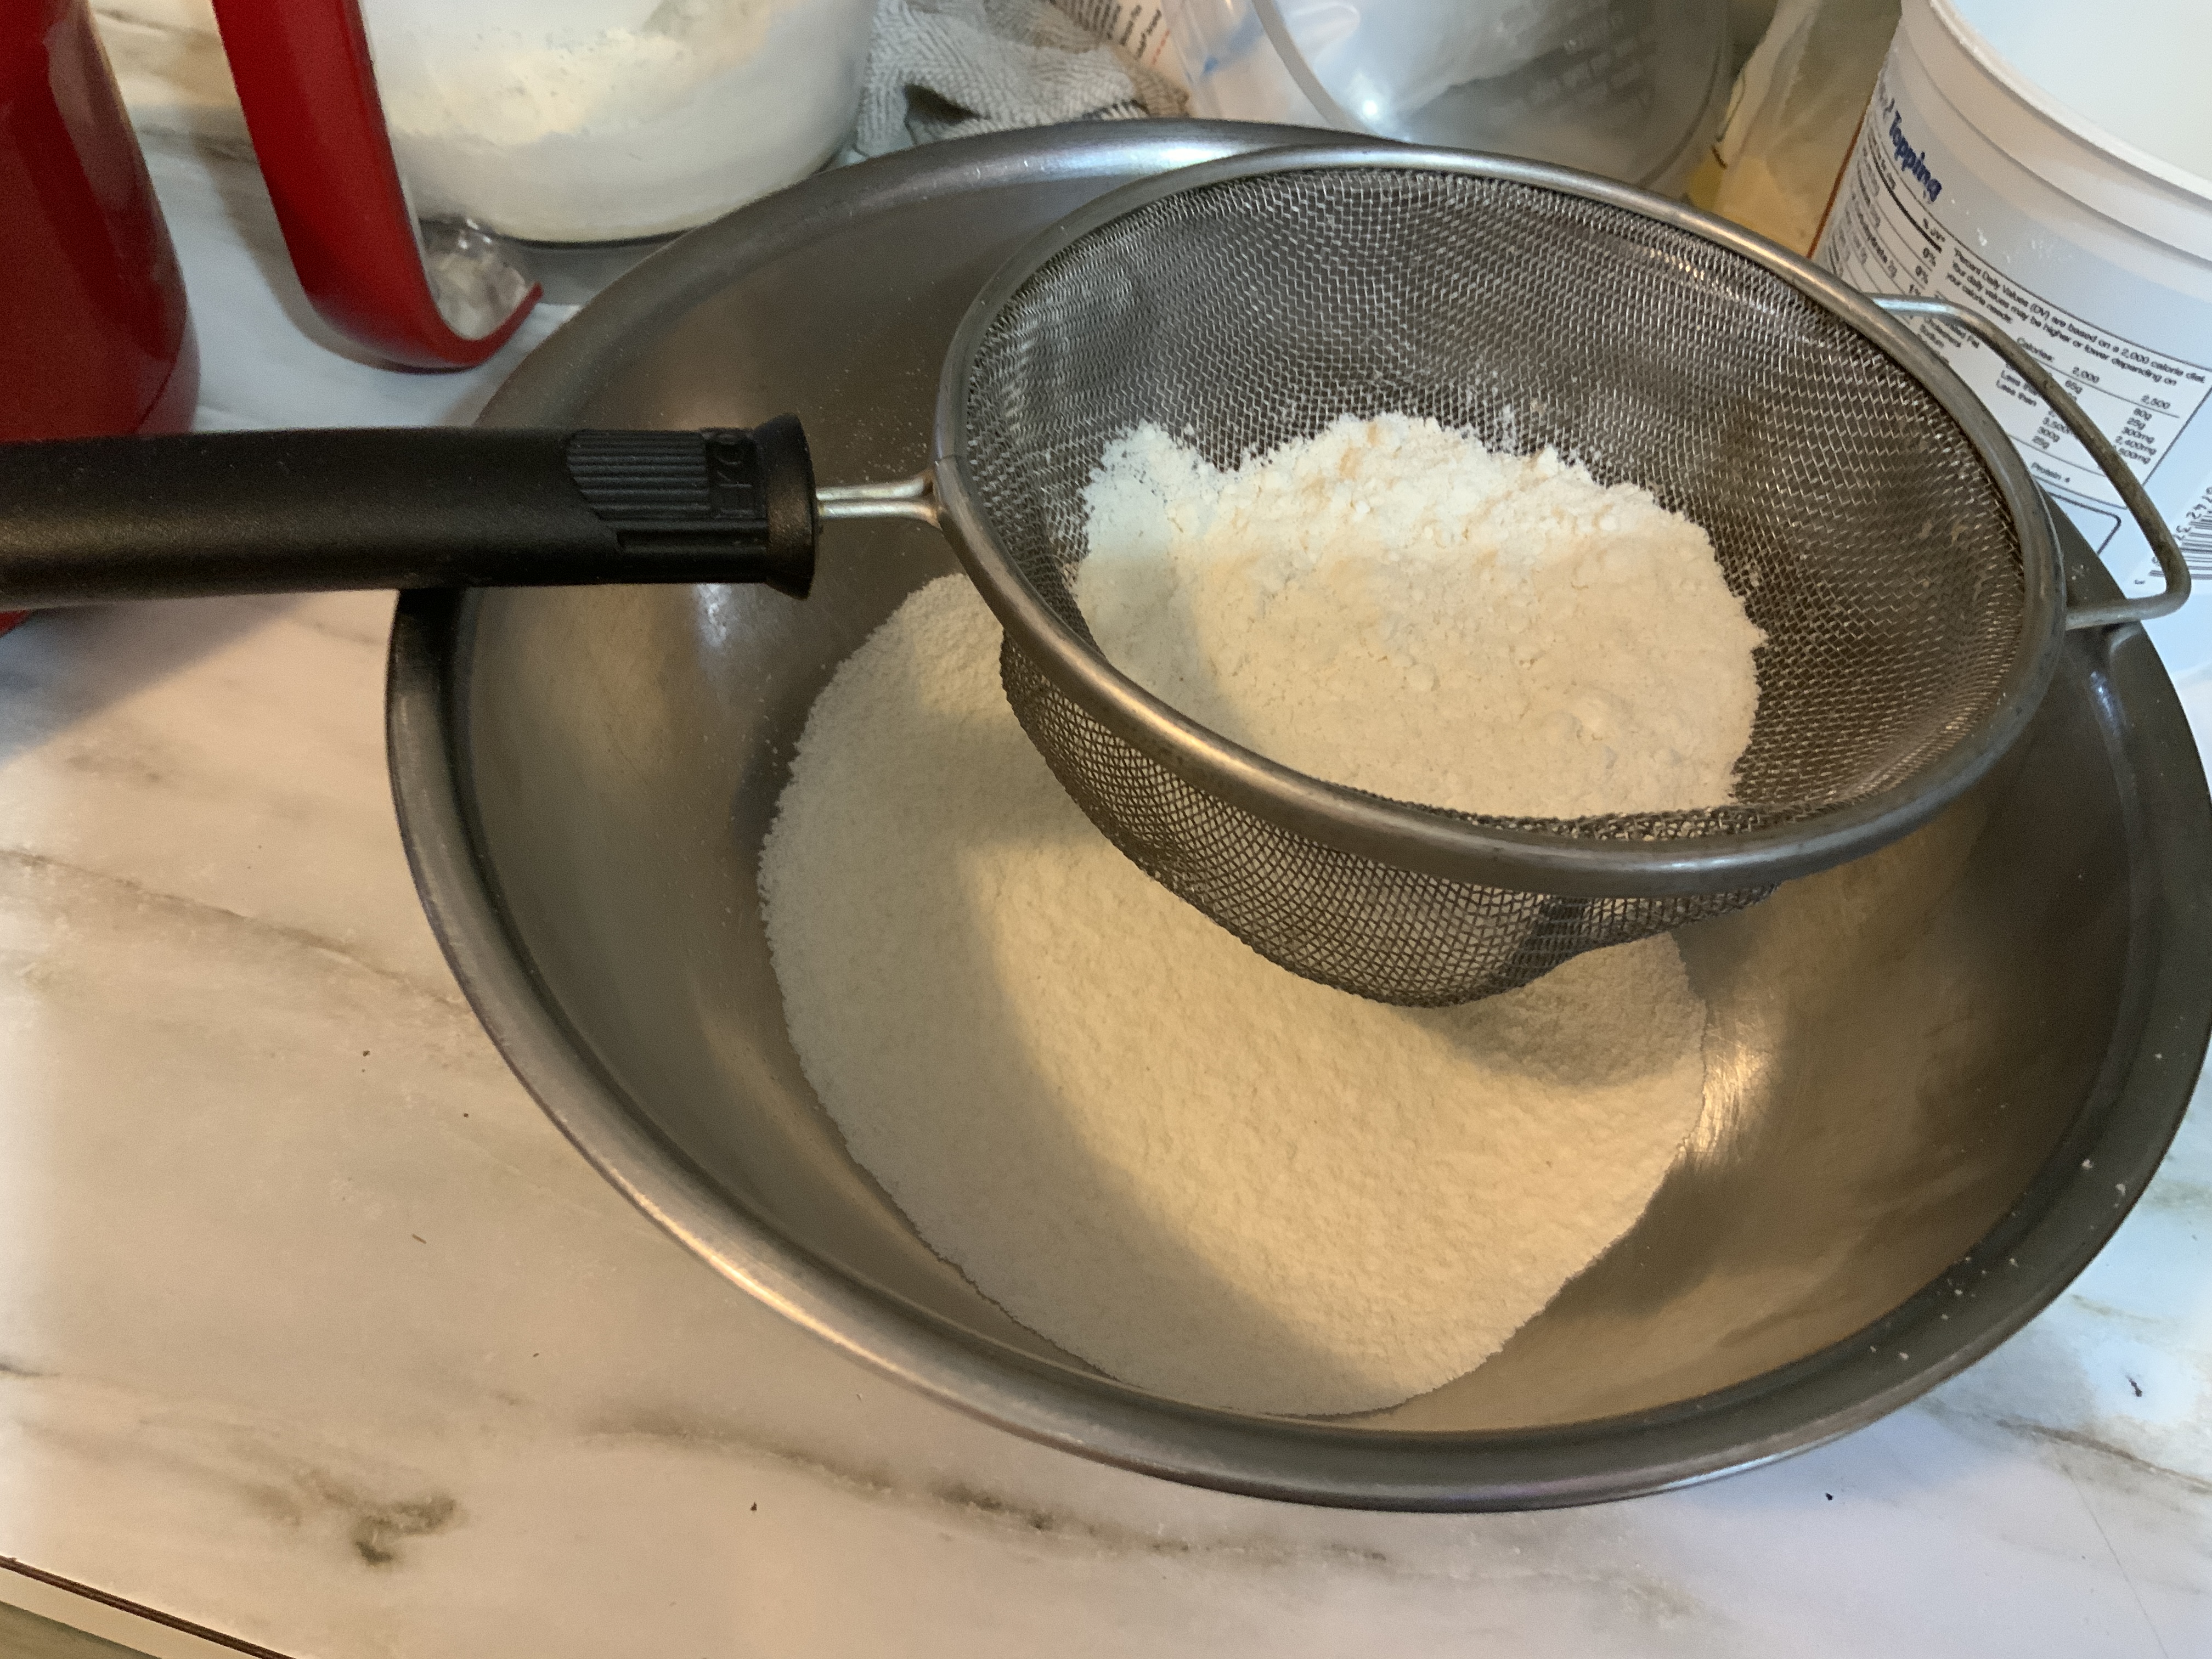 “Sifted almond flour and powdered sugar”